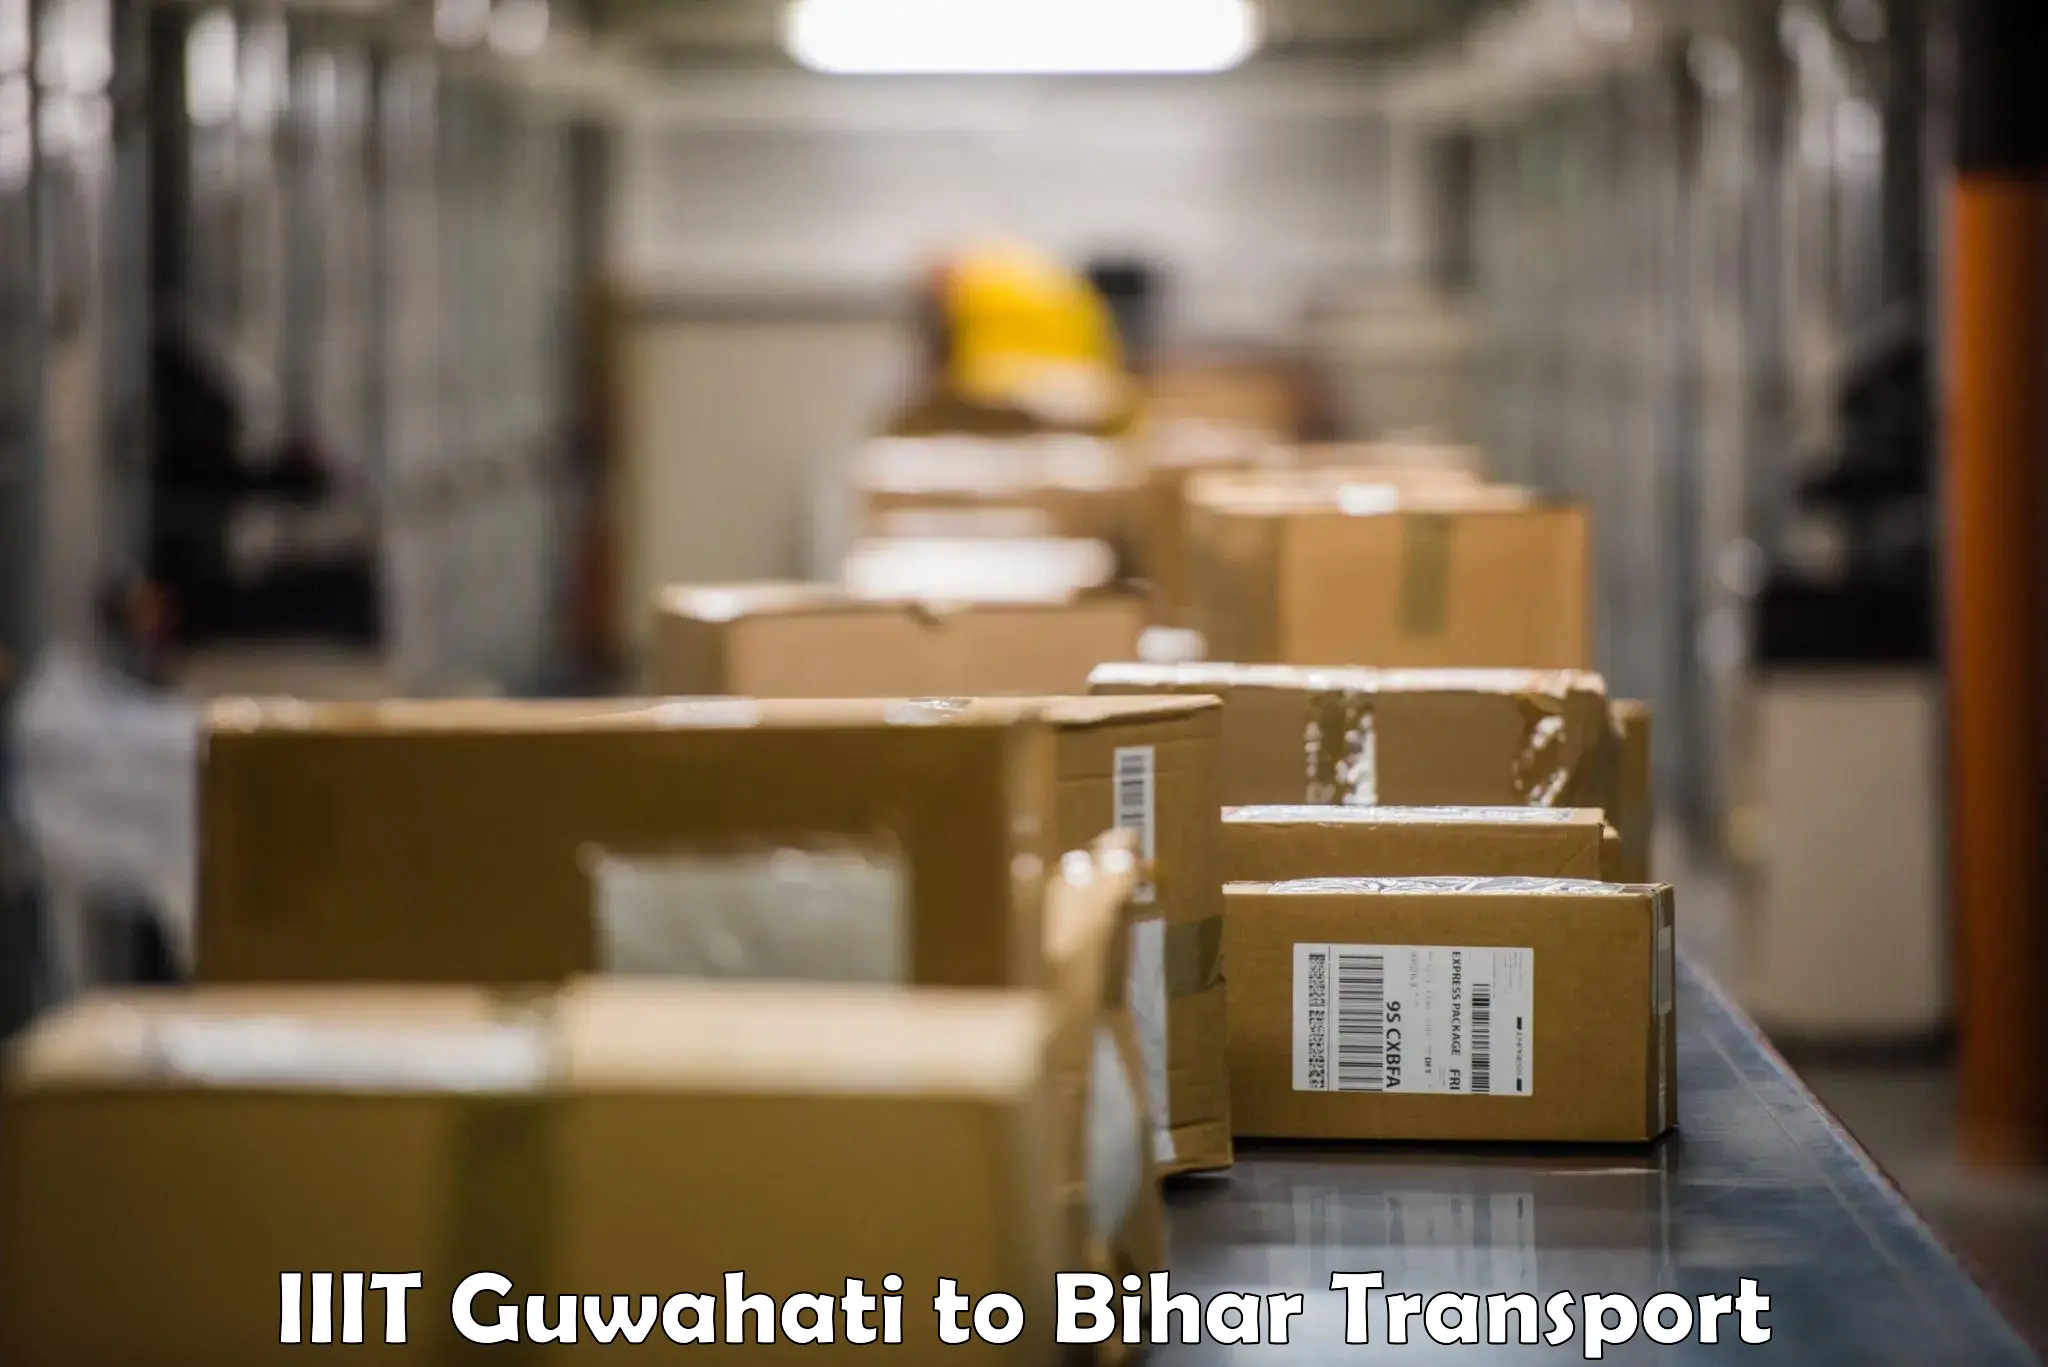 Commercial transport service IIIT Guwahati to Chhapra